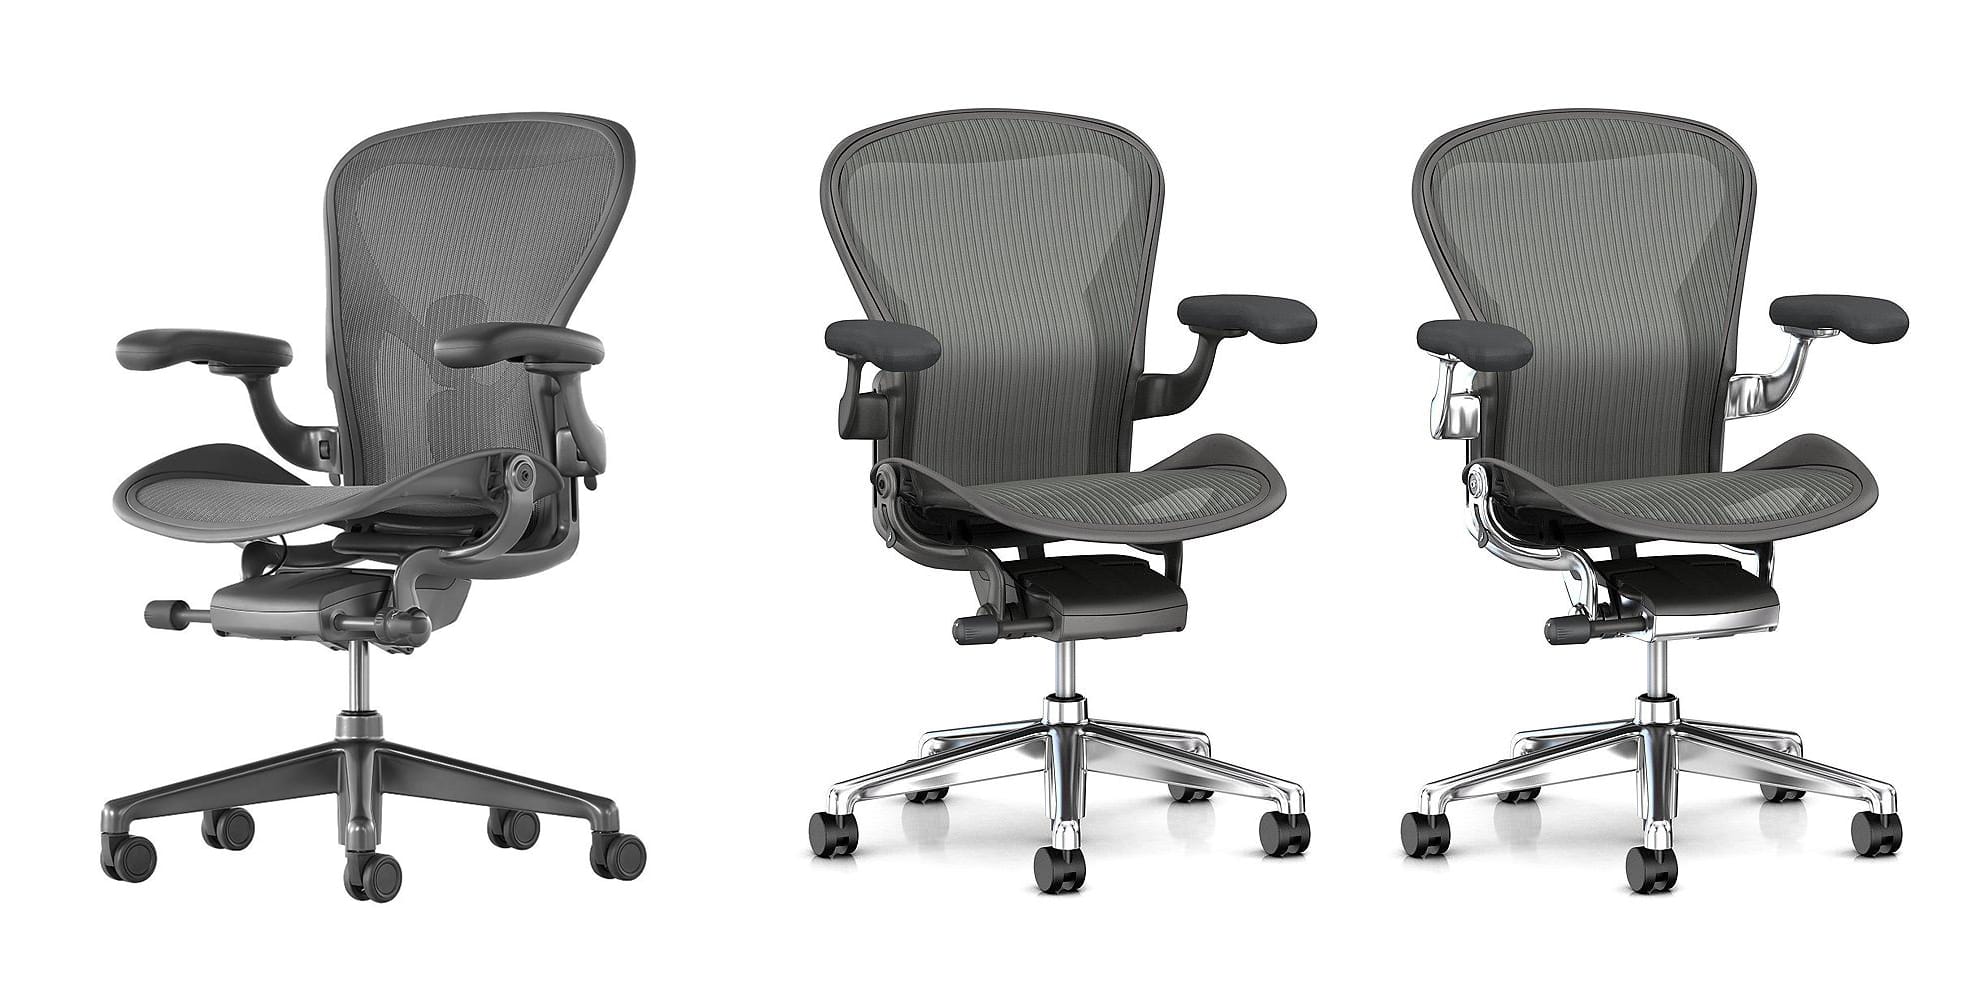 Three Aeron Chairs in different Satin Carbon and Polished Aluminum finishes.